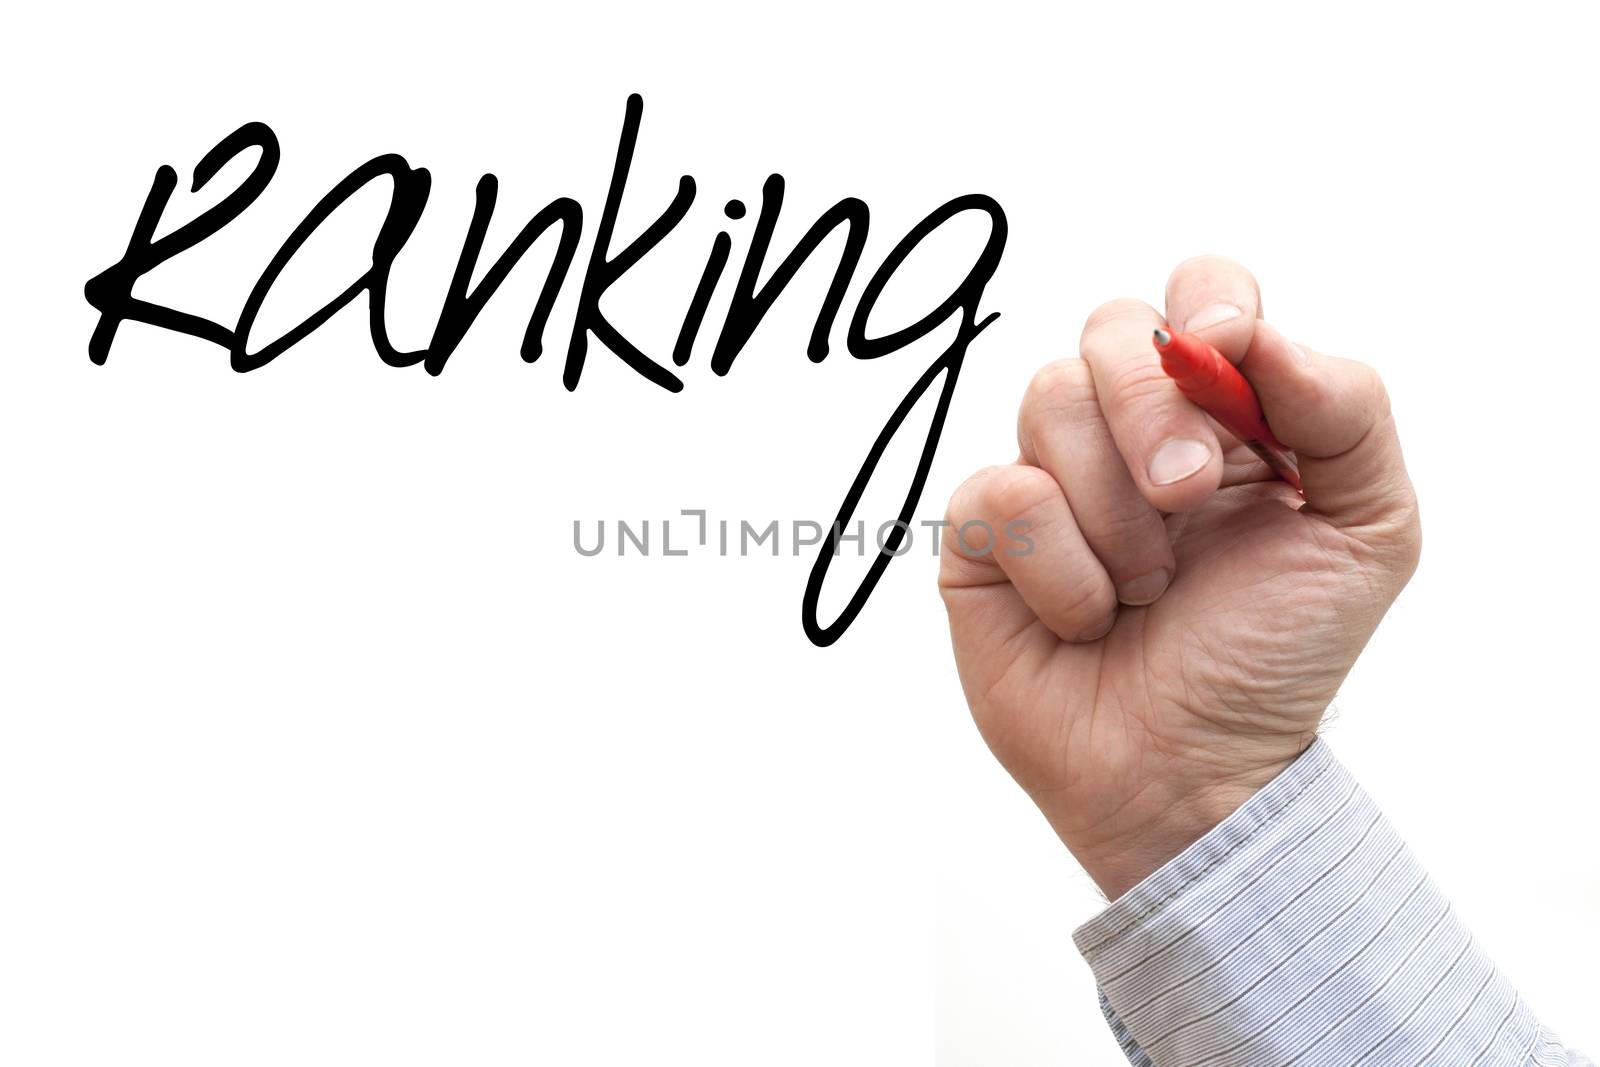 A Photo / Illustration of a Hand Writing 'Ranking'